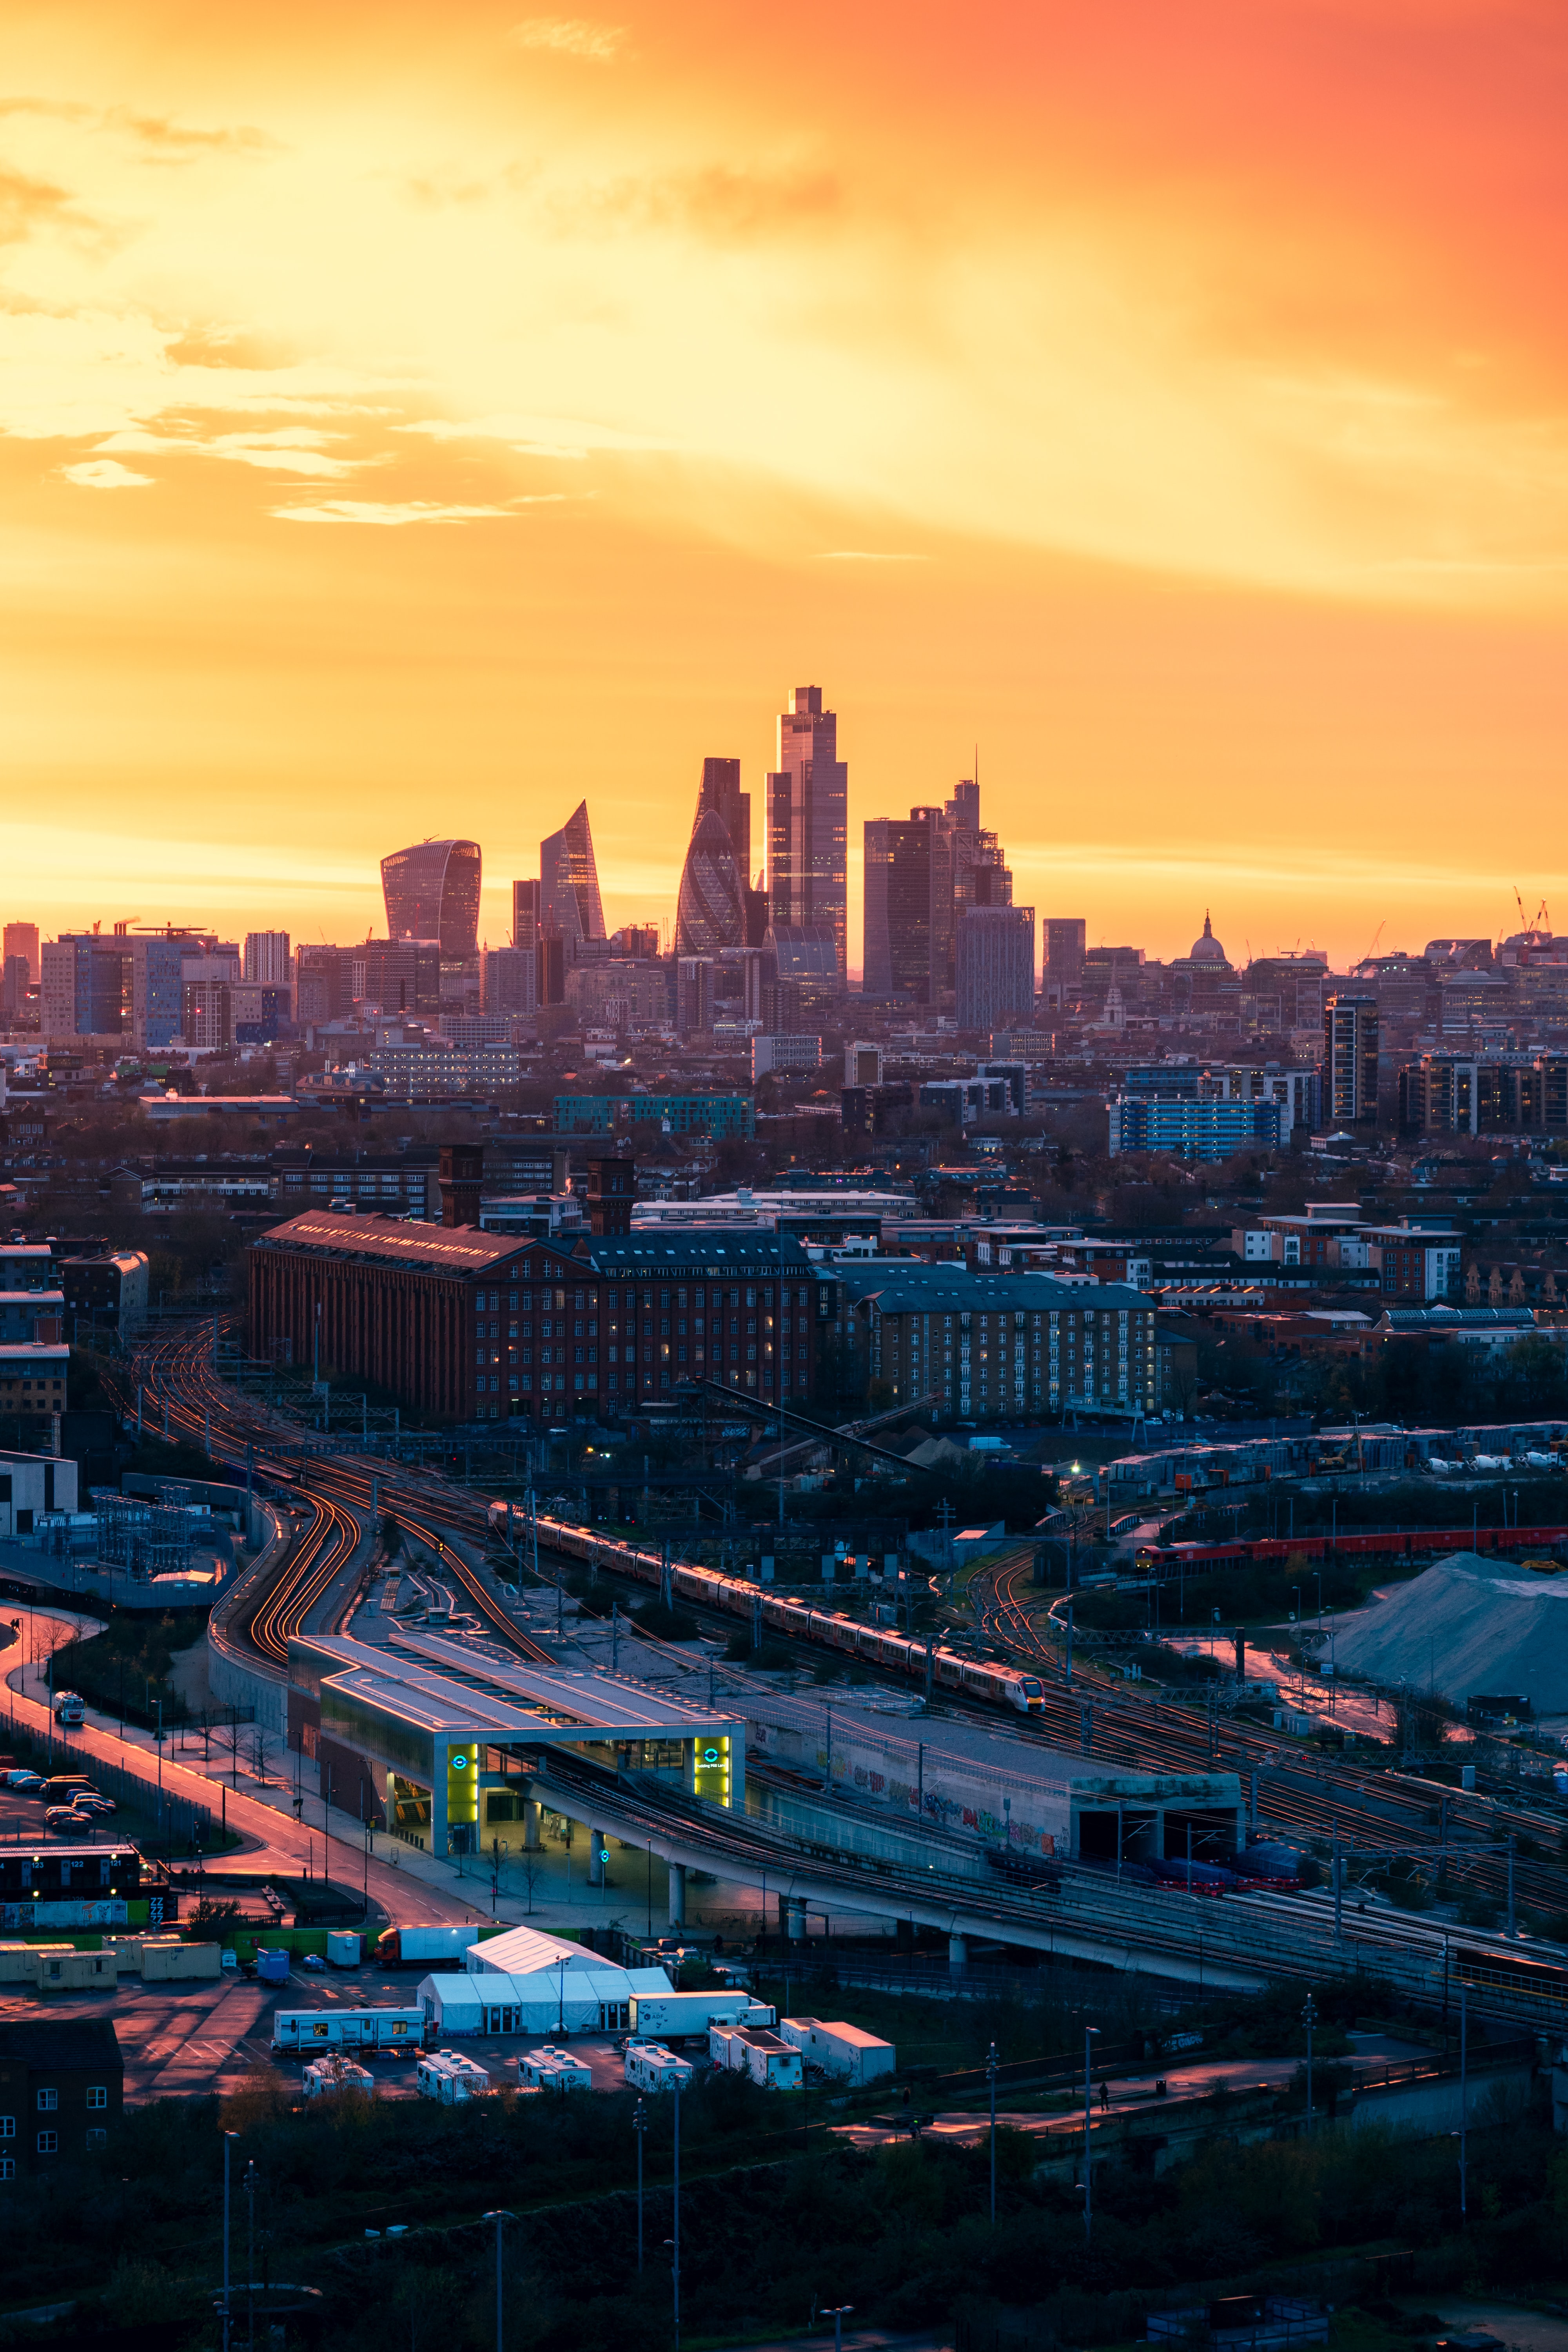 cities, sunset, architecture, city, building, view from above Desktop home screen Wallpaper